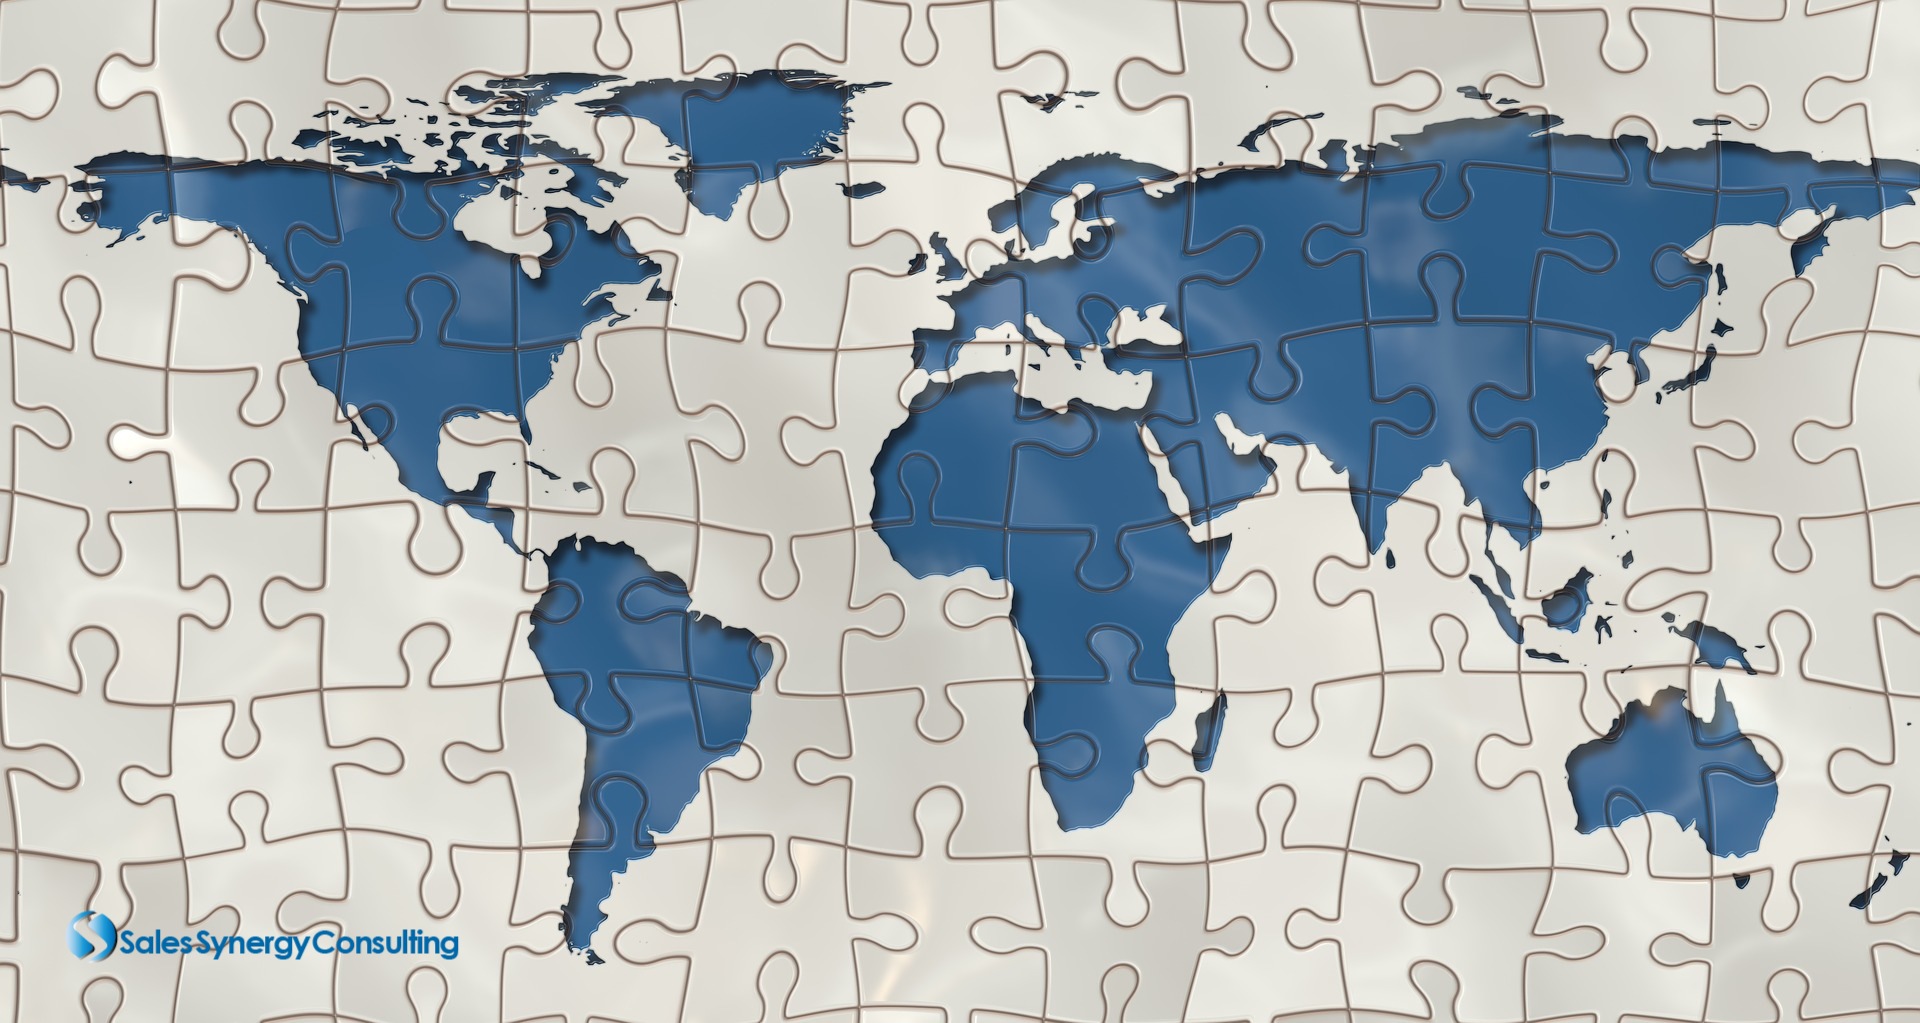 Blue-and-white map of the world made into a puzzle